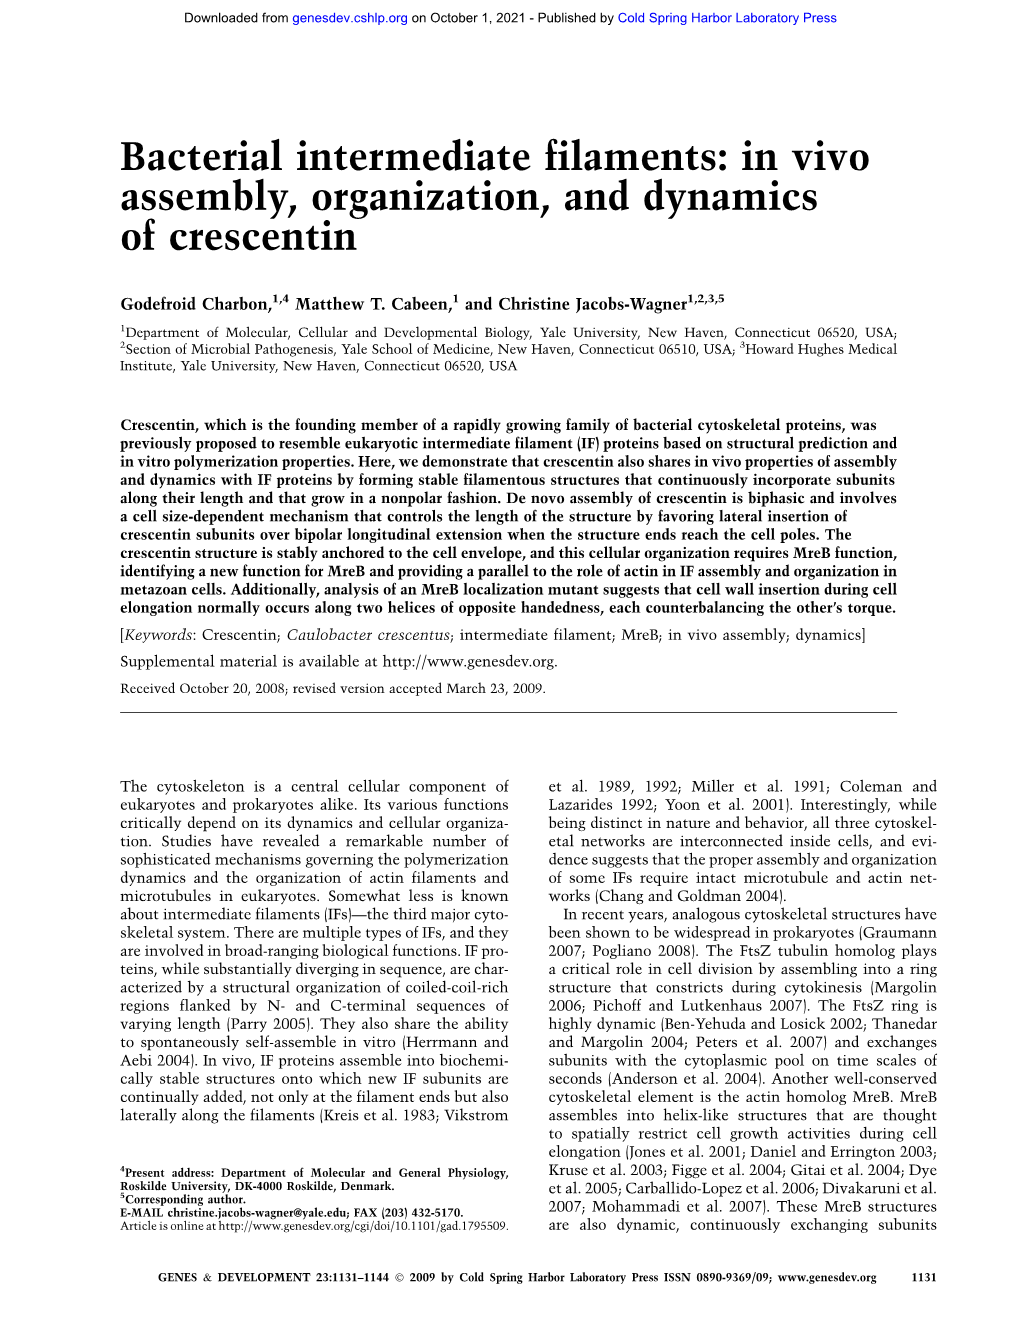 In Vivo Assembly, Organization, and Dynamics of Crescentin